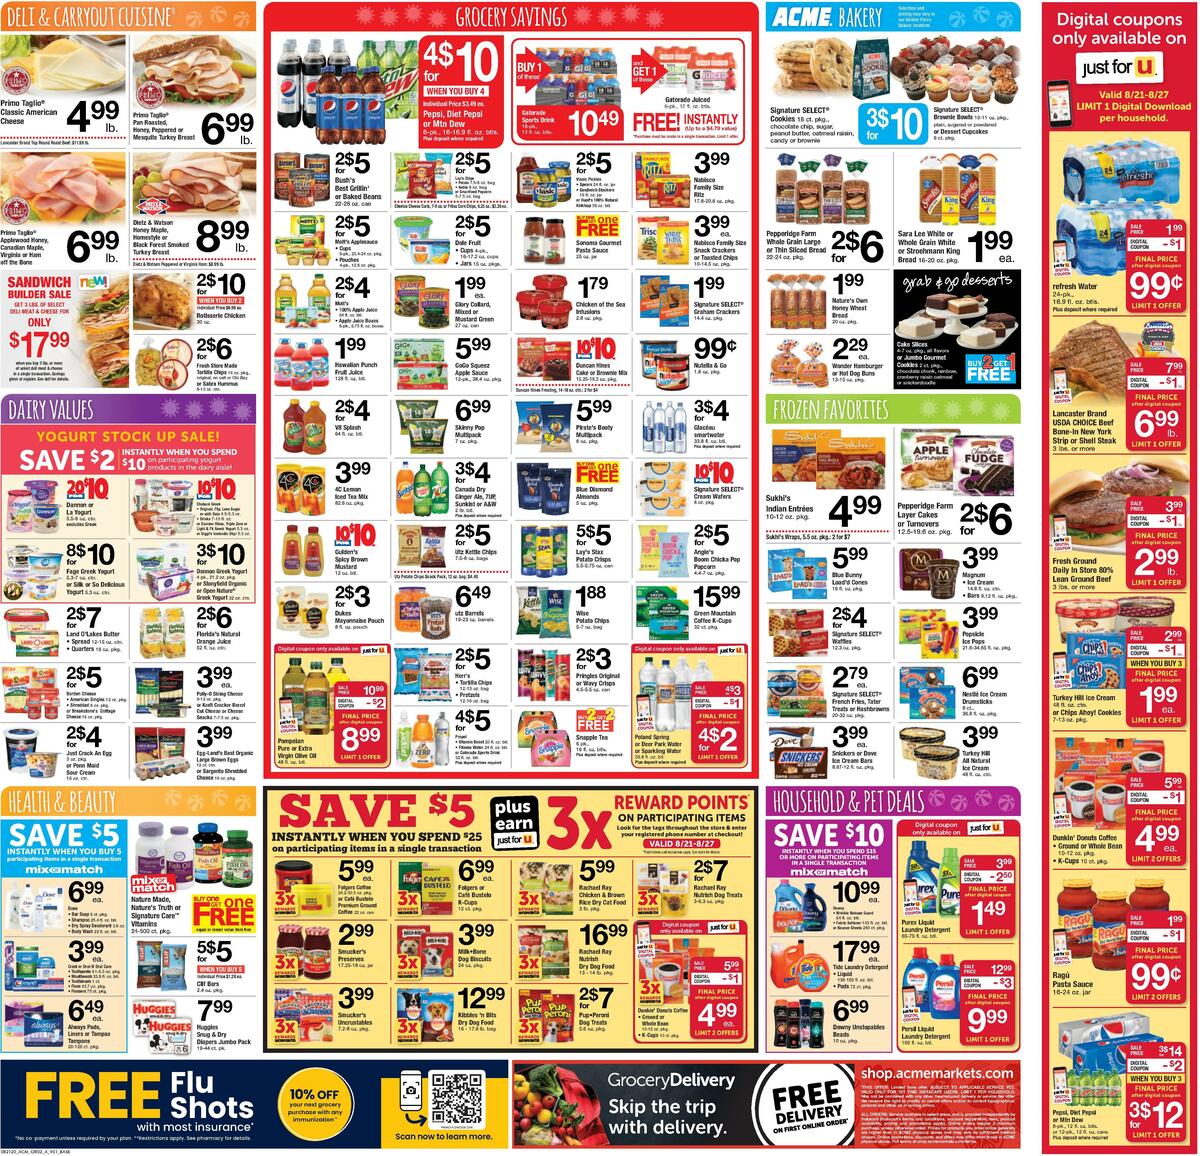 ACME Markets Weekly Ad from August 21